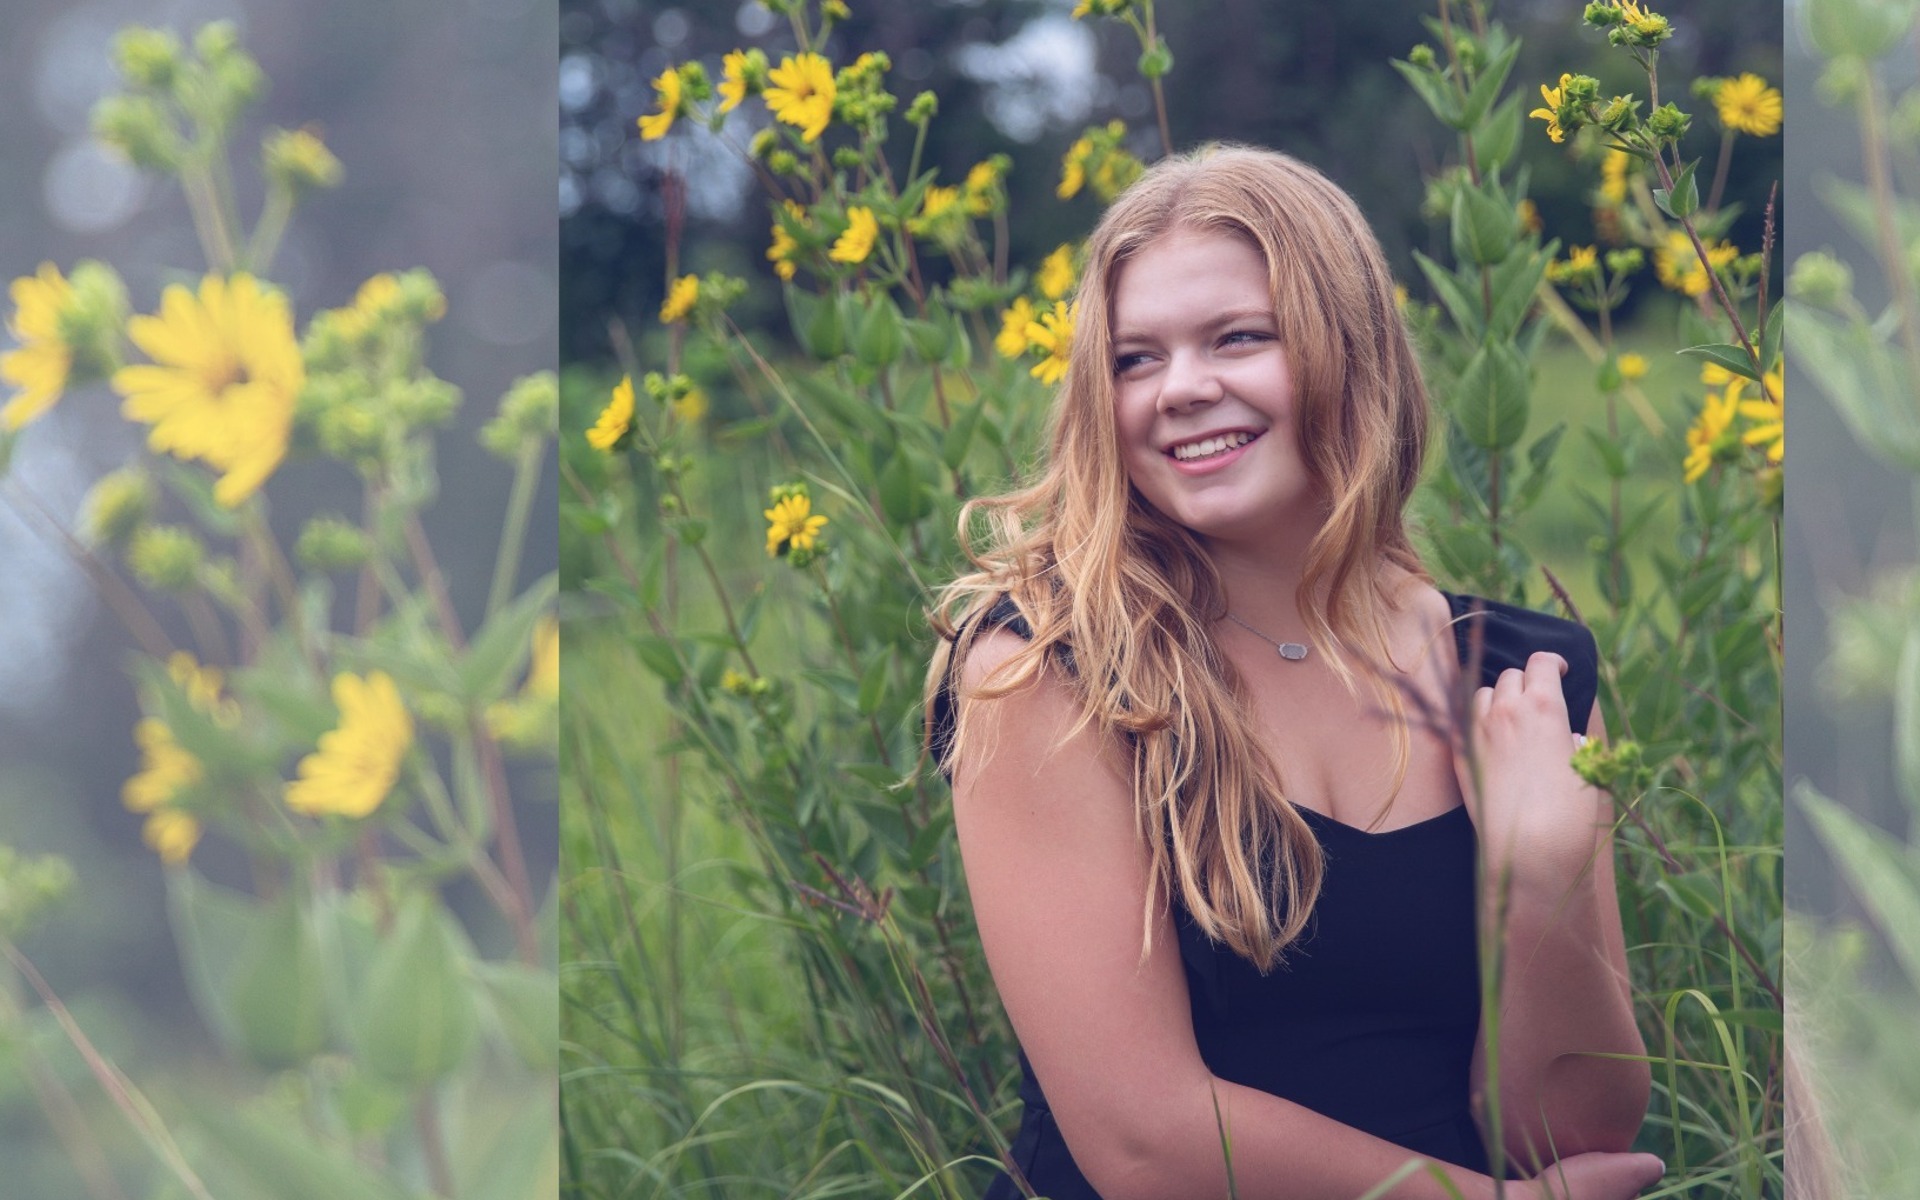 hs senior girl laughs off camera in a field of yellow flowers